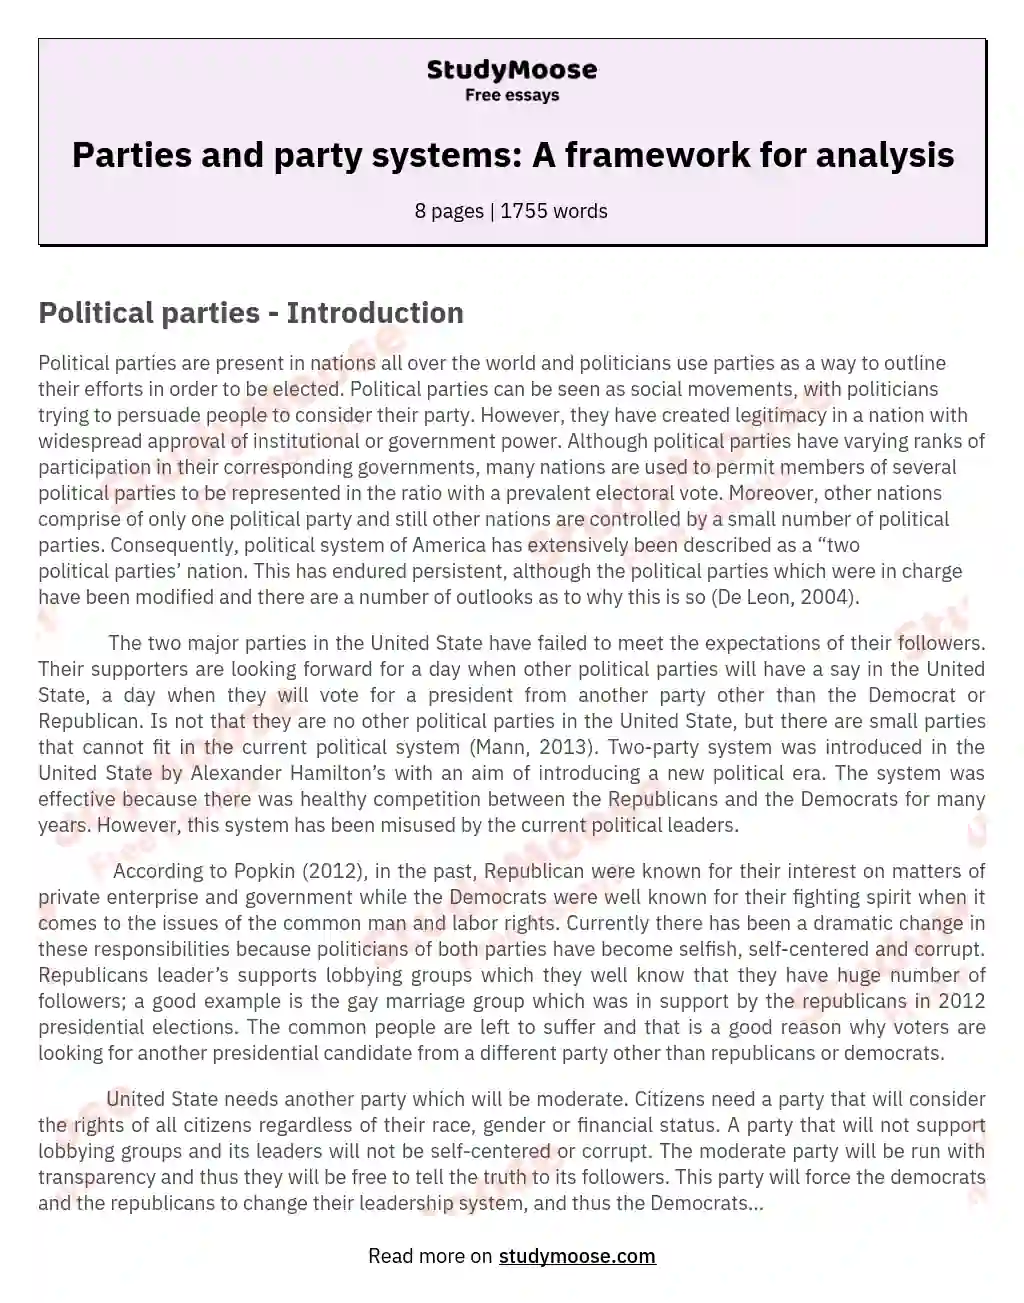 Parties and party systems: A framework for analysis